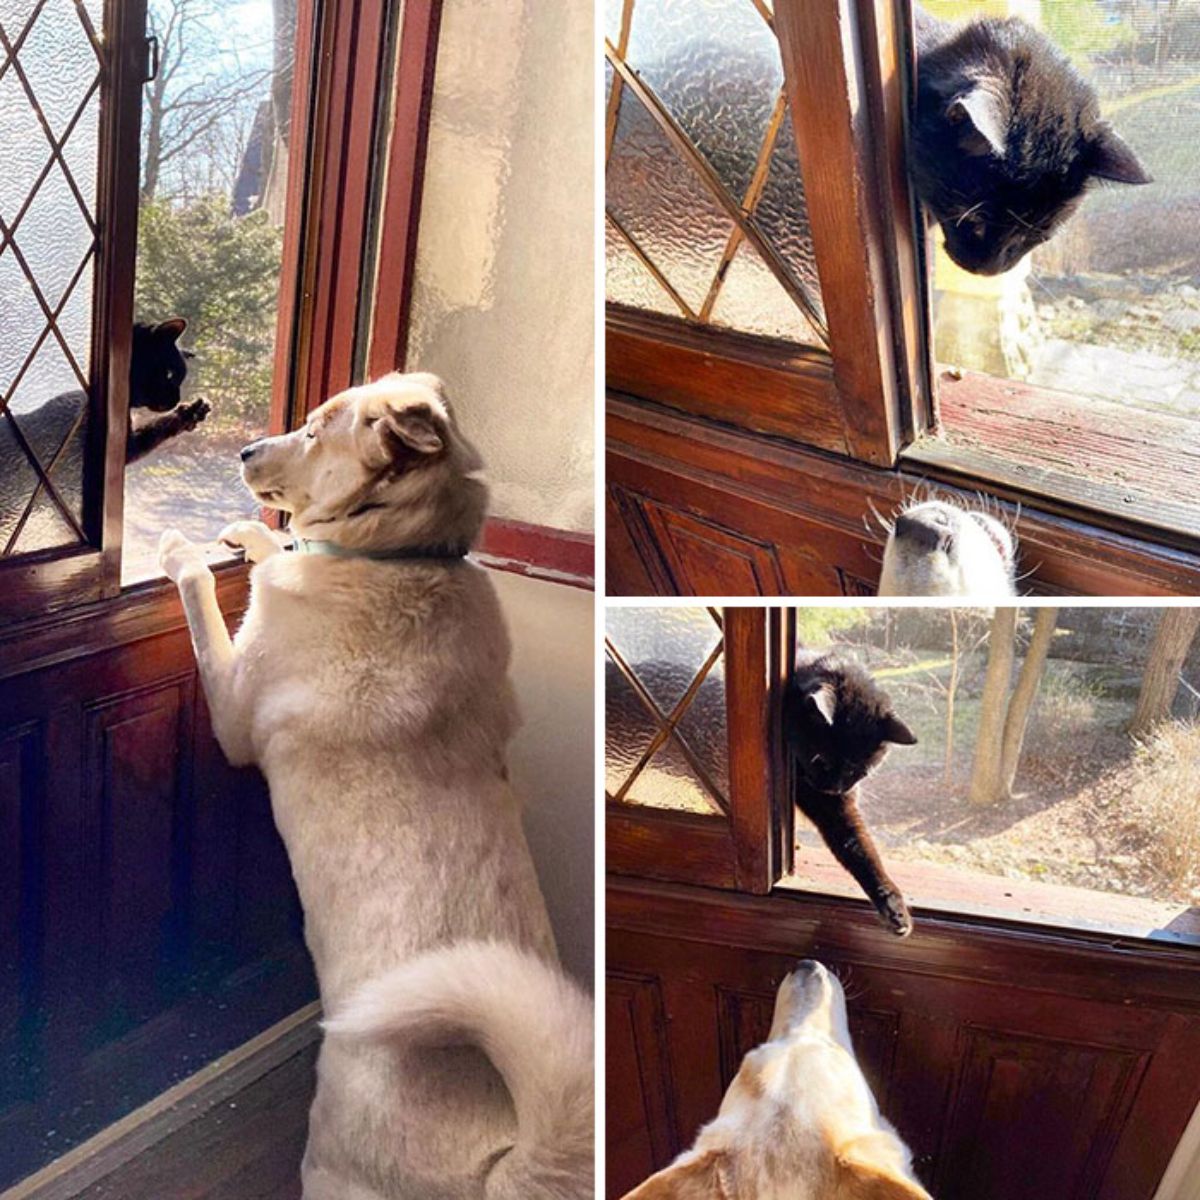 3 photos of a black cat on the outside of a window swiping at a white dog standing on hind legs and peeking out of the window